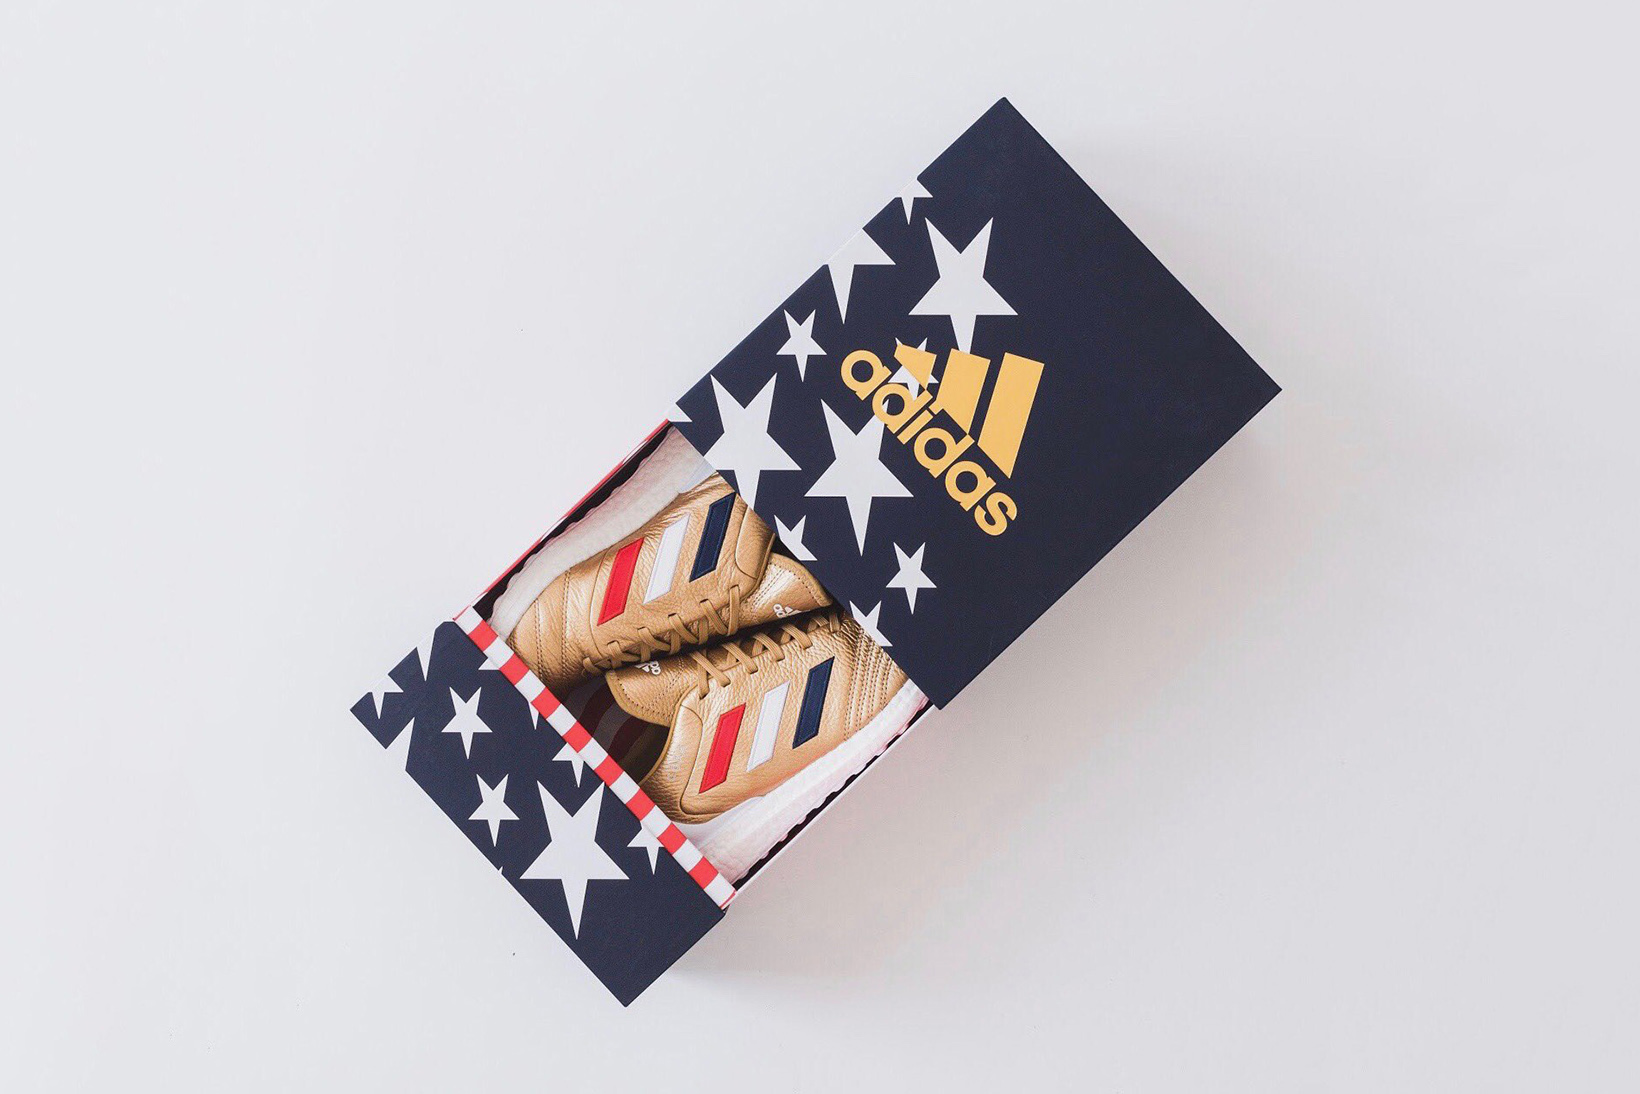 Ronnie Fieg KITH adidas Soccer UltraBOOST Preview ultra boost gold red white blue ace purecontrol copa 2018 release date info drop teaser ace 16 + america usa flag colorway